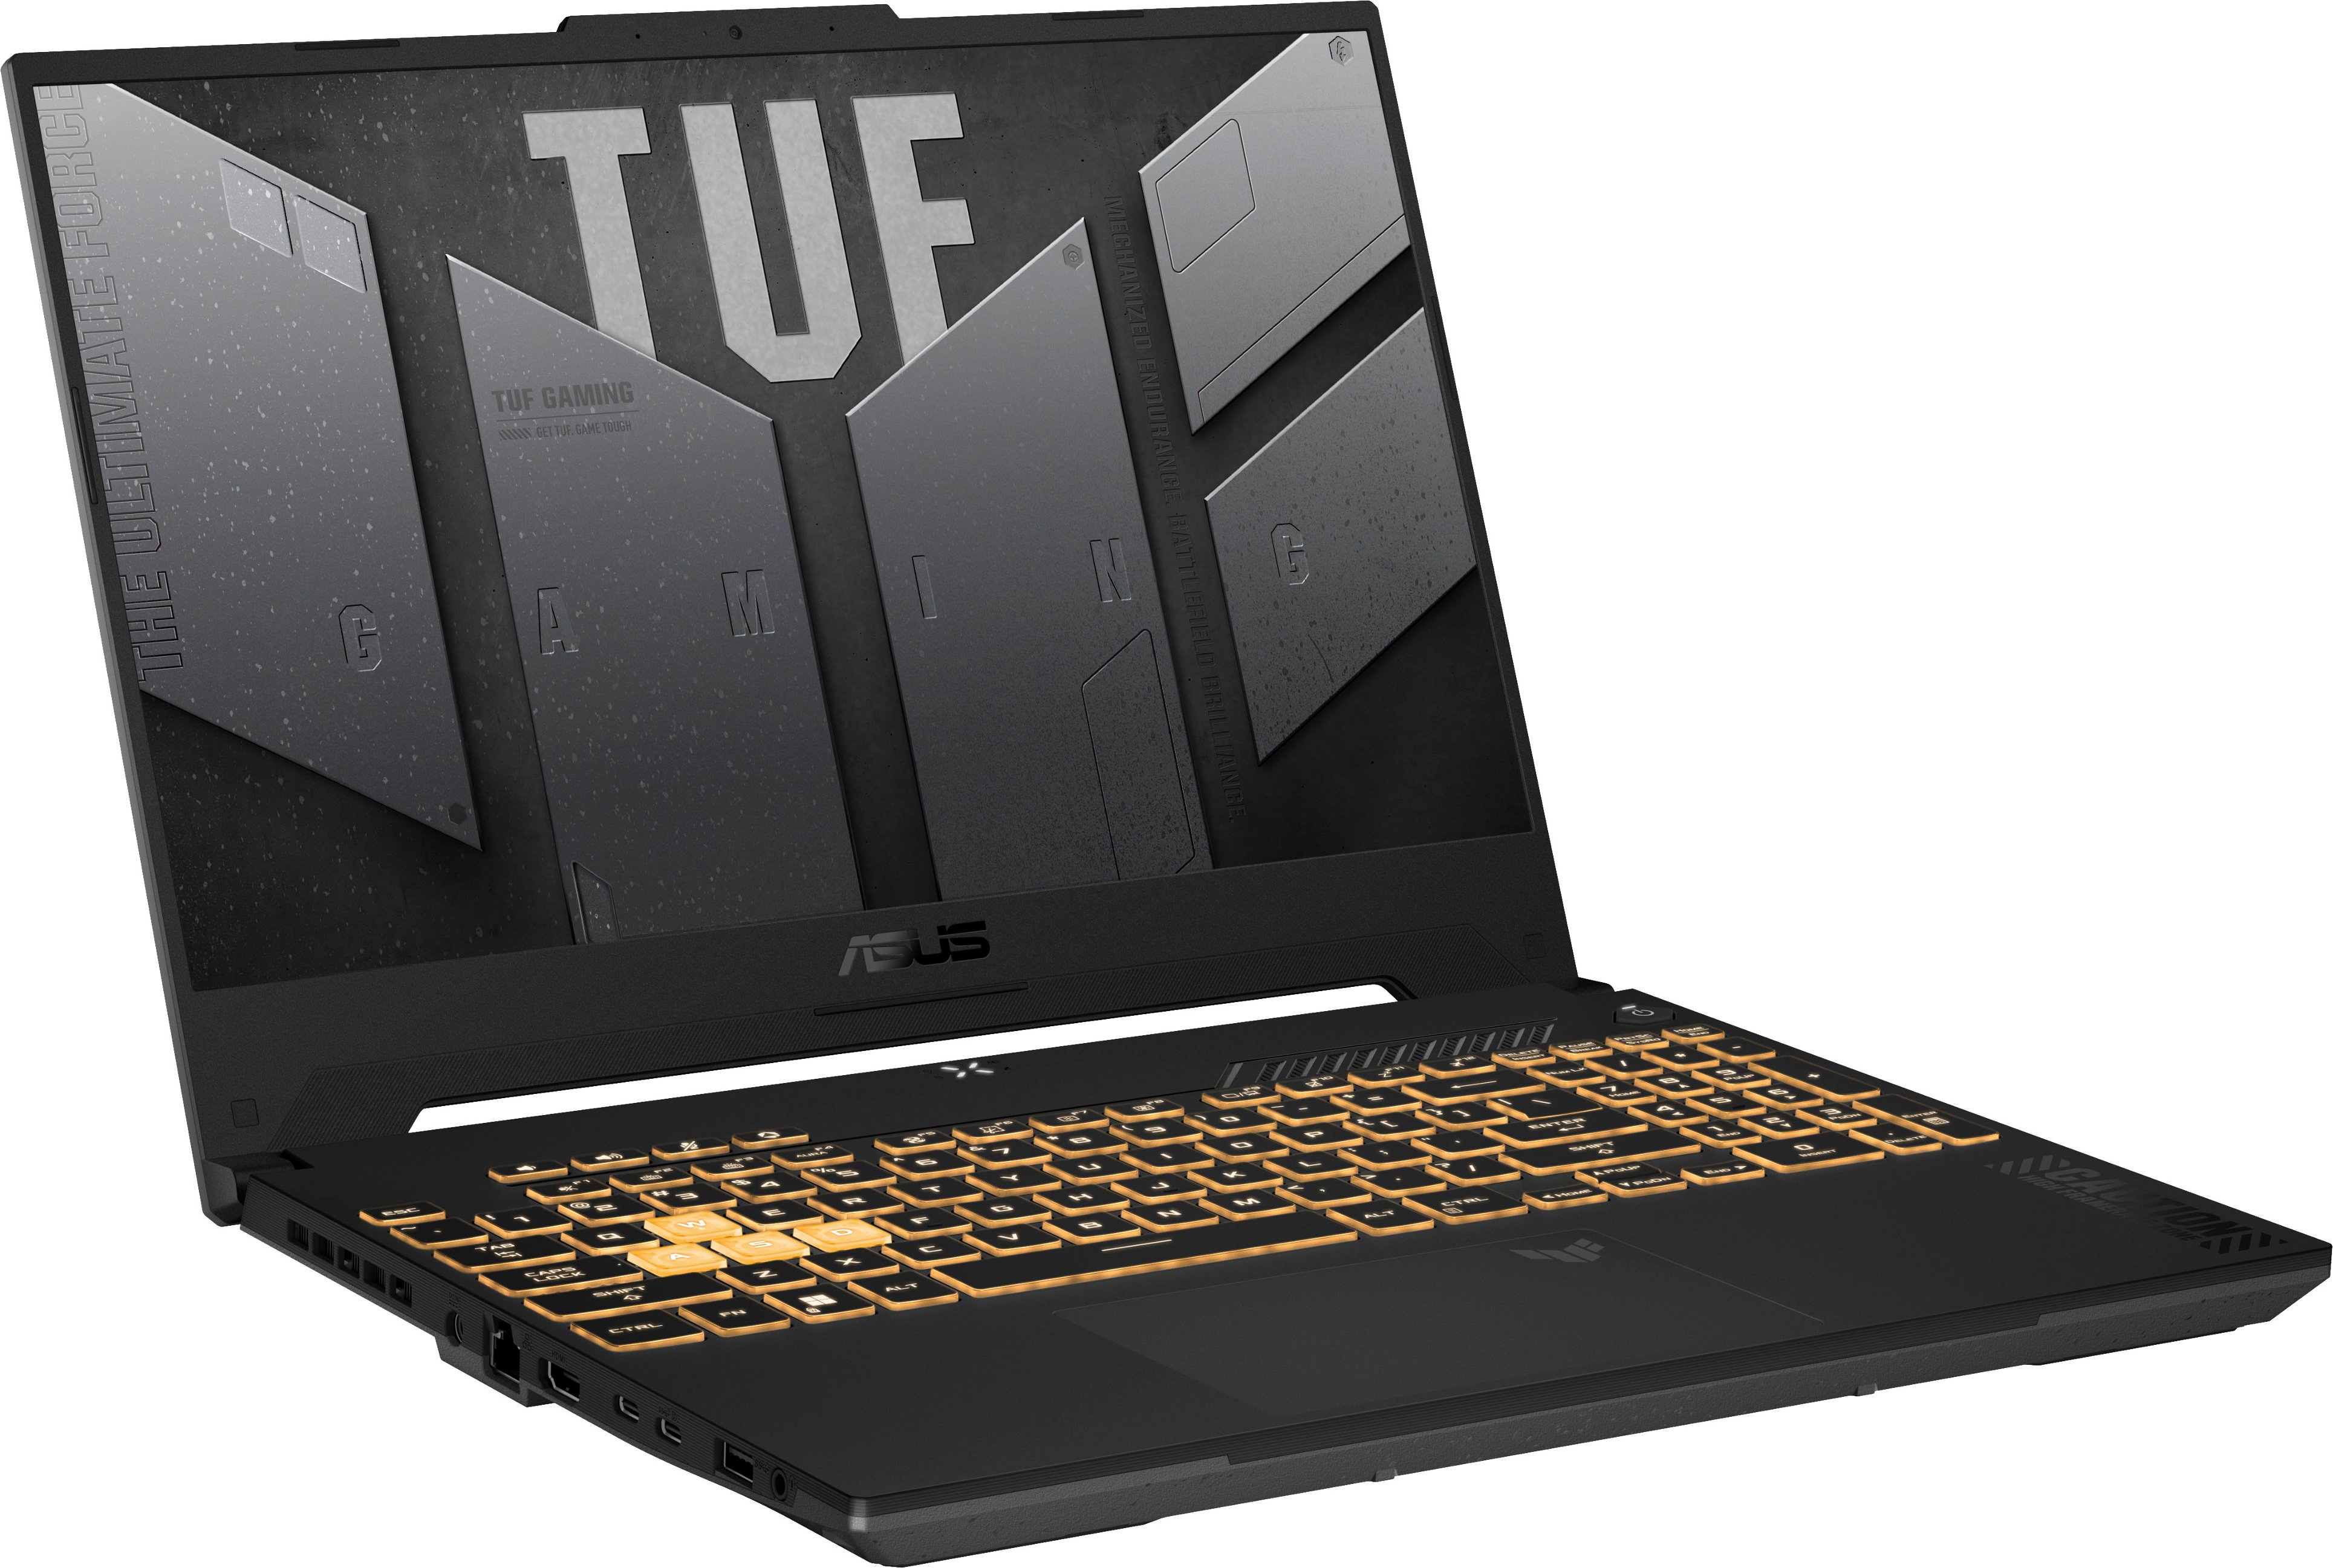 Angle View: ASUS - TUF 15.6" Gaming Laptop - Intel Core i7 with 16GB Memory - NVIDIA GeForce RTX 4070 - 1TB SSD - Mecha Grey